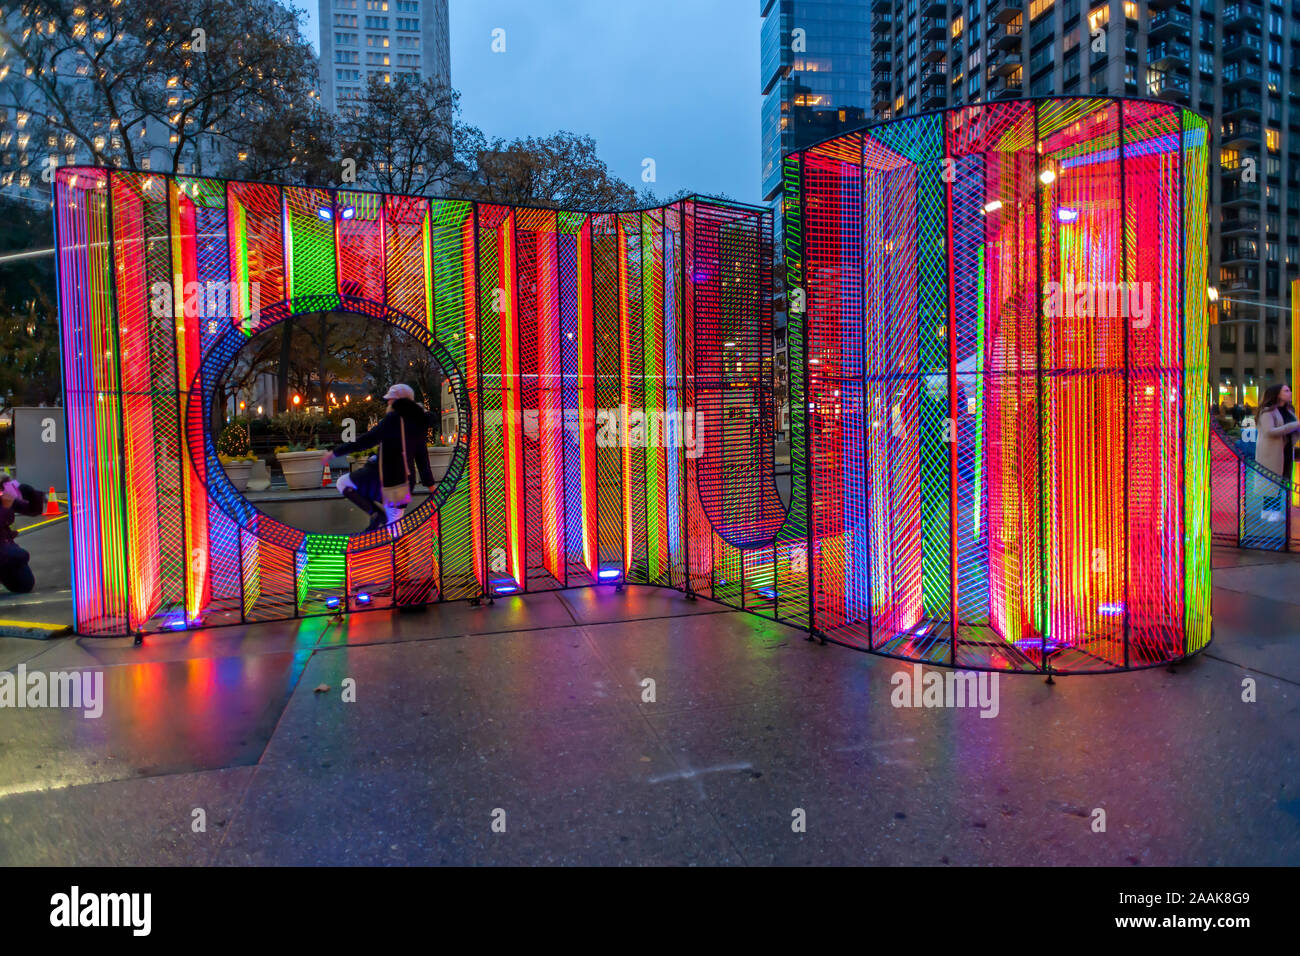 Visitors to Flatiron Plaza in New York on Monday, November 18, 2019 interact with “Ziggy” created by Hou de Sousa. The Christmas installation is the centerpiece of the Flatiron/23rd Street Partnership's holiday programming, “23 Days of Flatiron Cheer”. “Ziggy” contains 27,000 feet of iridescent cord illuminated by uv lighting. (© Richard B. Levine) Stock Photo